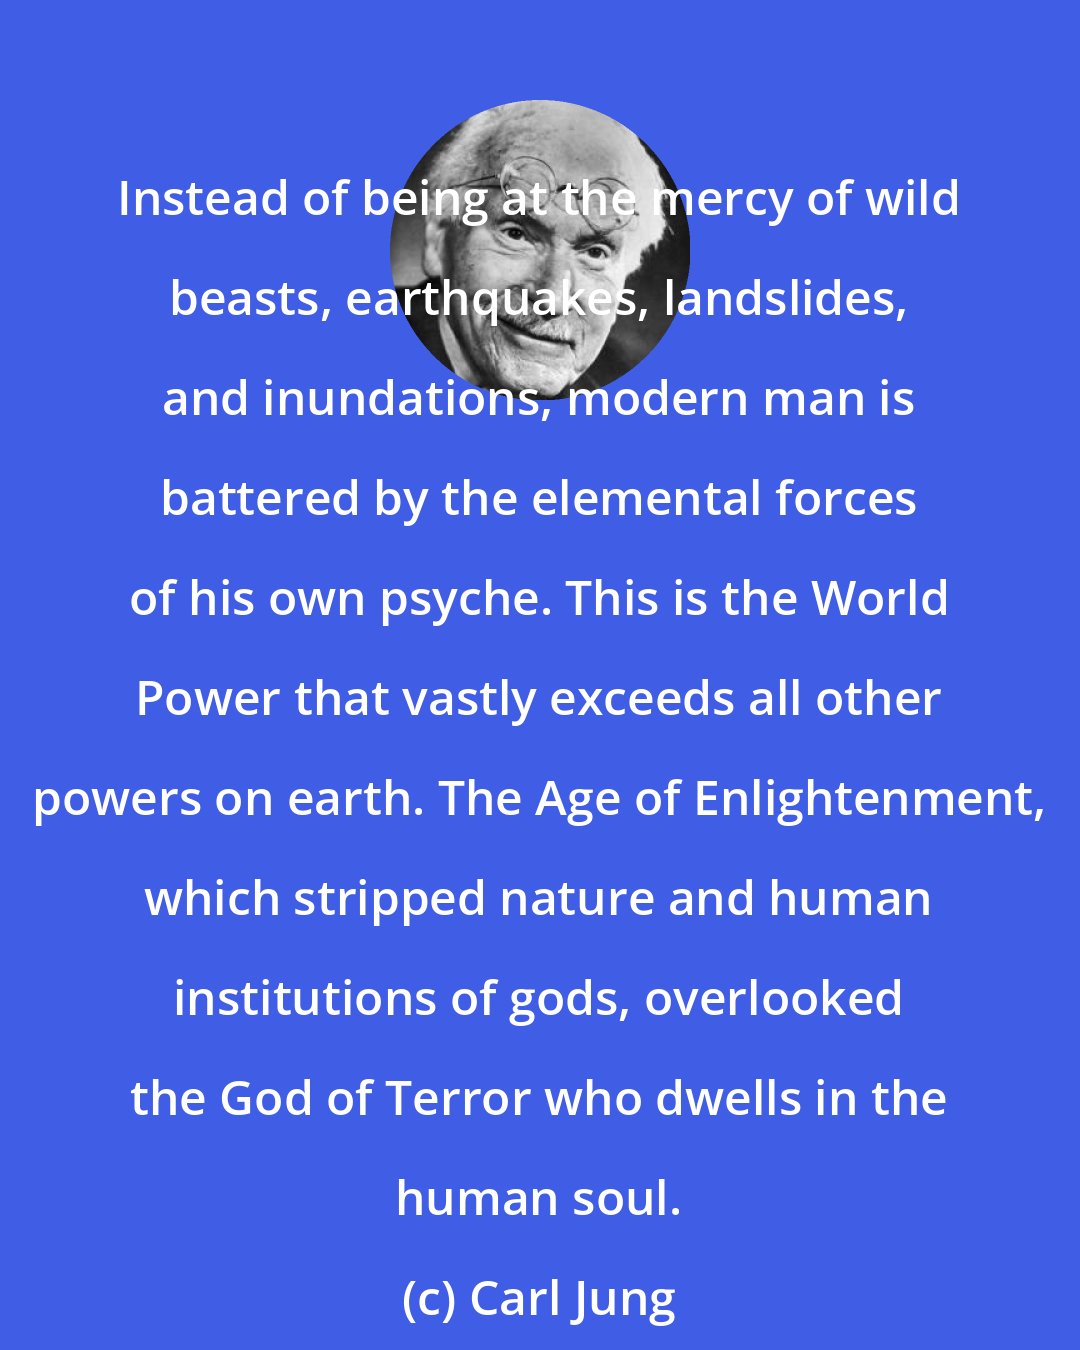 Carl Jung: Instead of being at the mercy of wild beasts, earthquakes, landslides, and inundations, modern man is battered by the elemental forces of his own psyche. This is the World Power that vastly exceeds all other powers on earth. The Age of Enlightenment, which stripped nature and human institutions of gods, overlooked the God of Terror who dwells in the human soul.